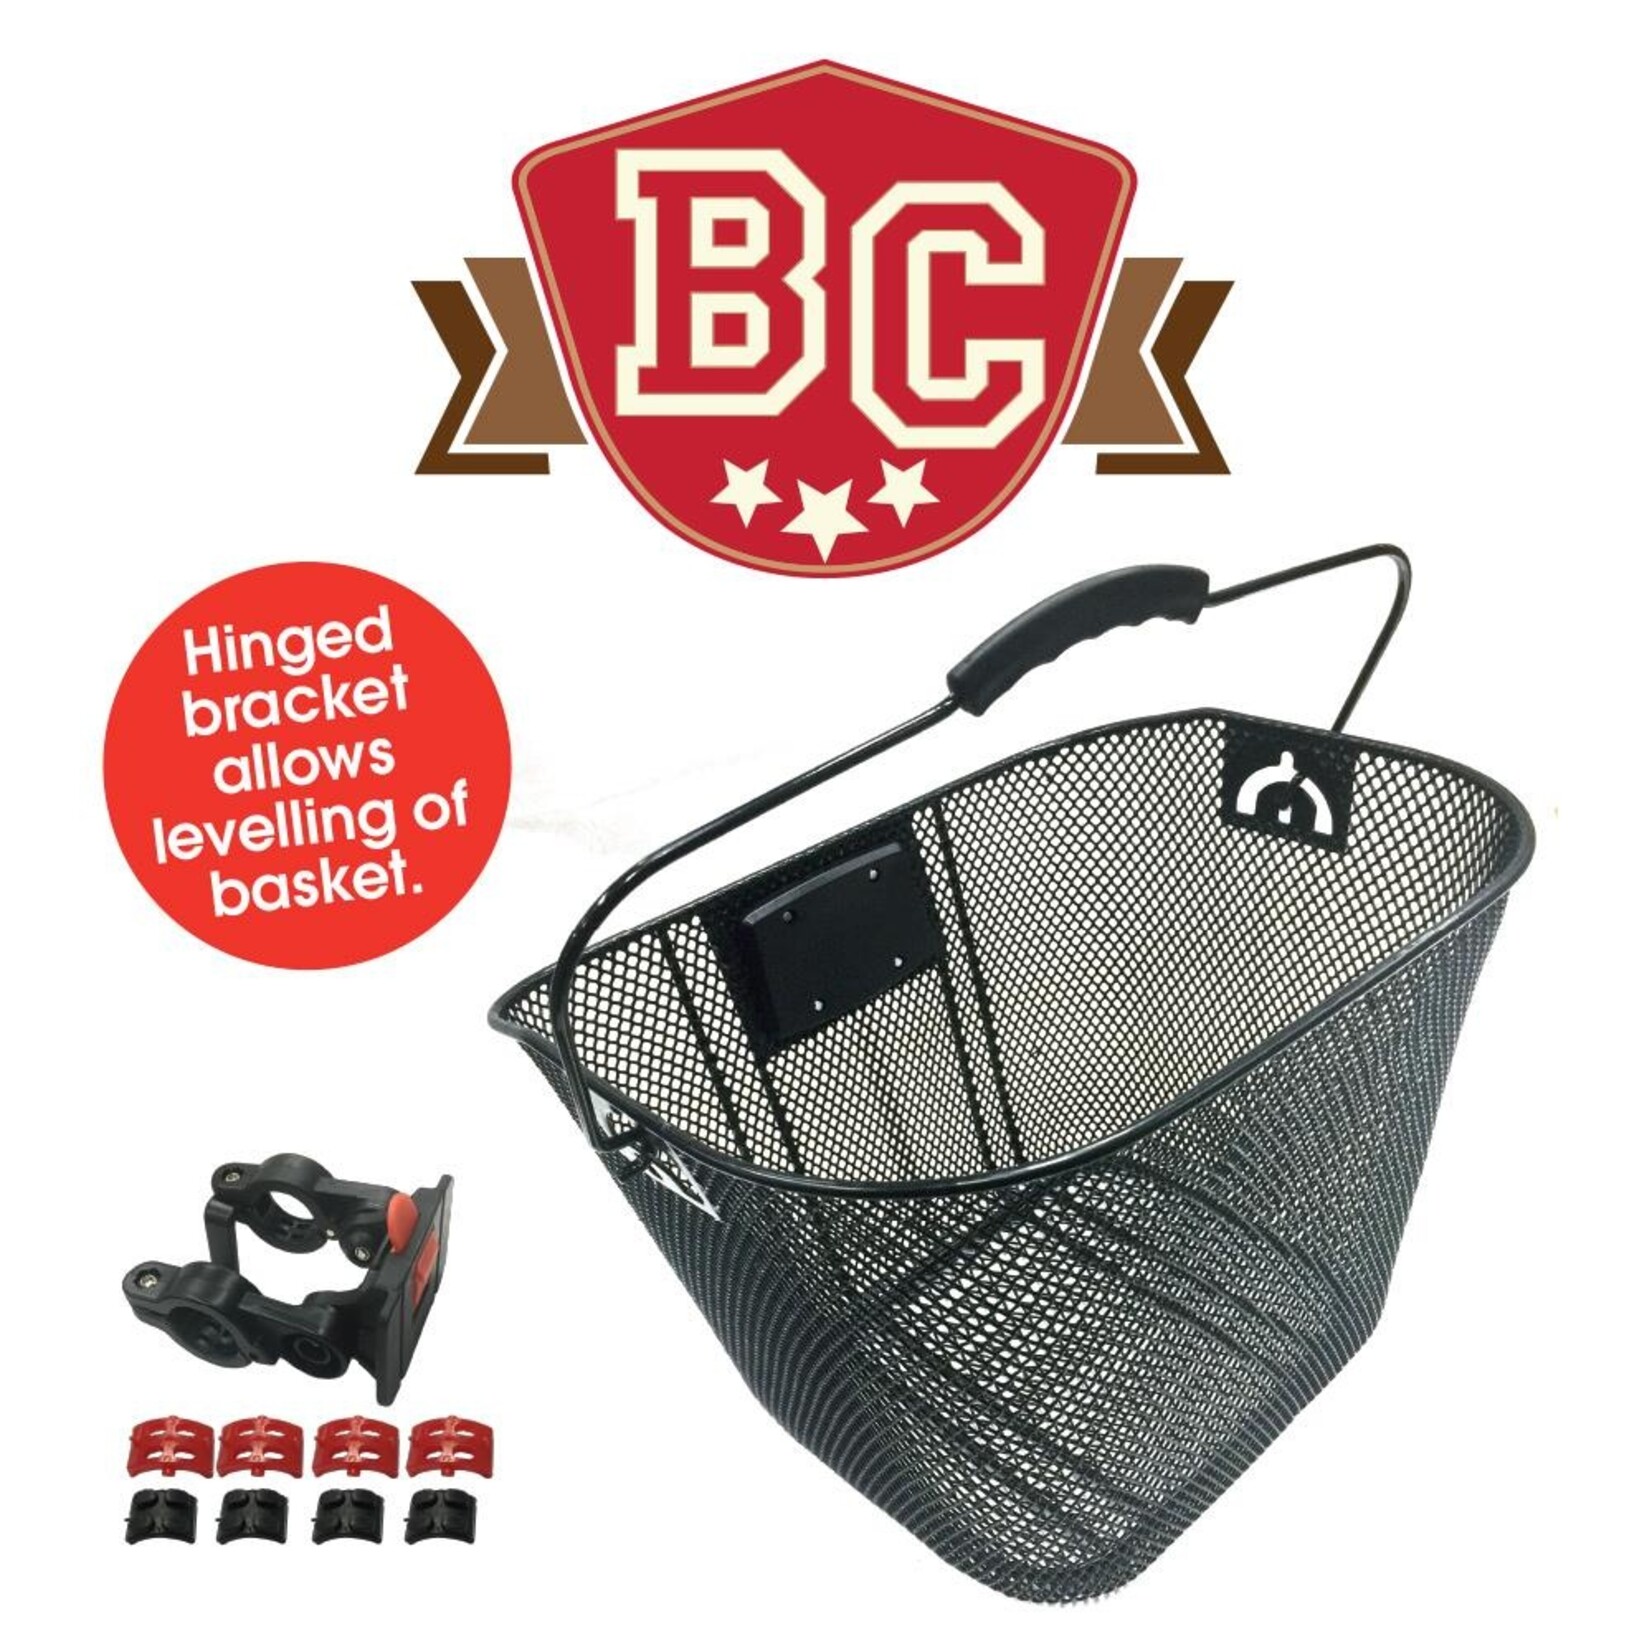 Bikecorp (The Bicycle Corporation Pty. Ltd. BC Bicycle Wire Basket Mesh Front With Quick Release Adjustable Hinged Bracket